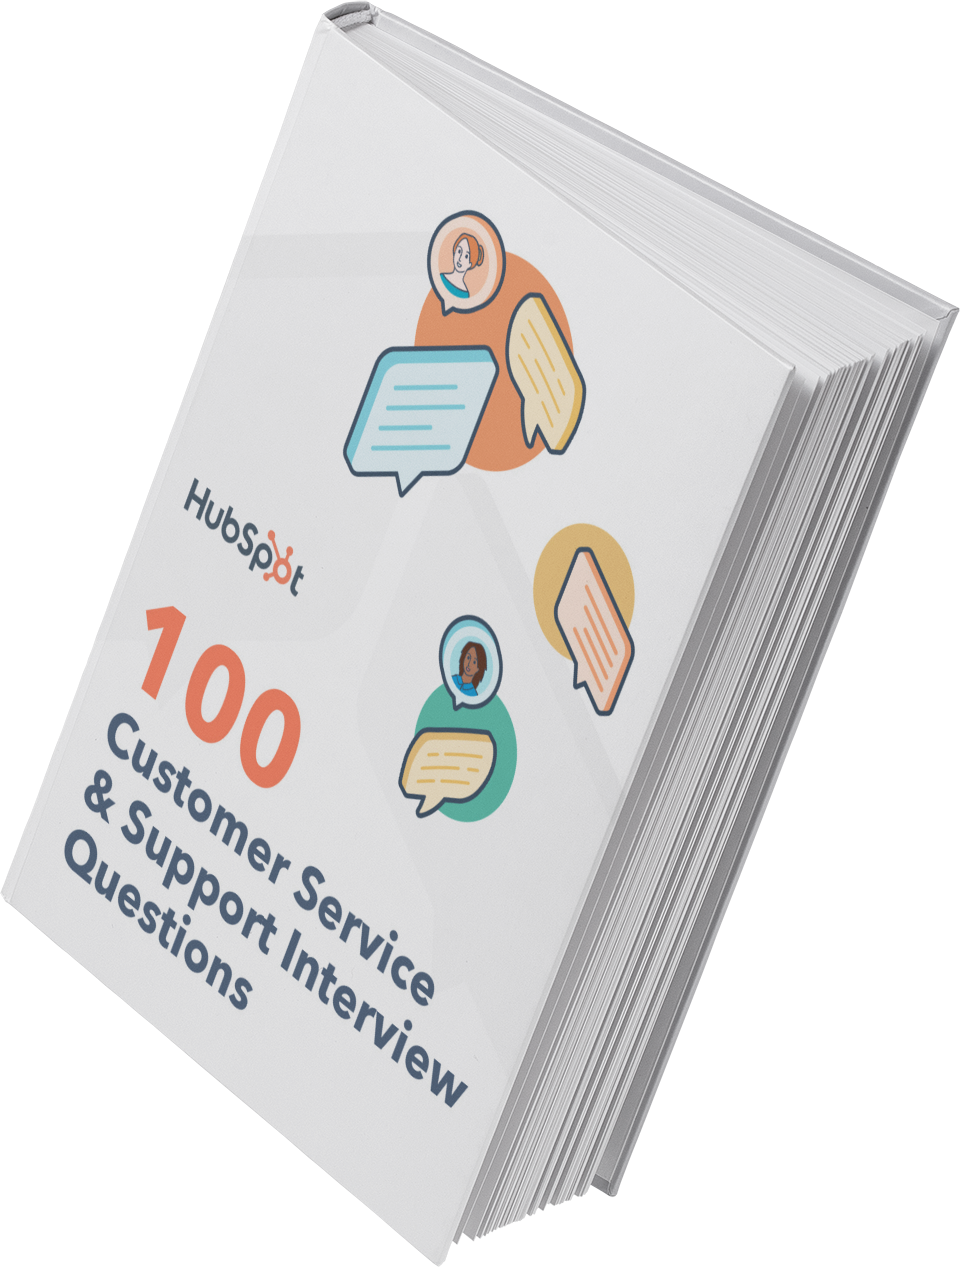 100 Customer Service & Support Interview Questions